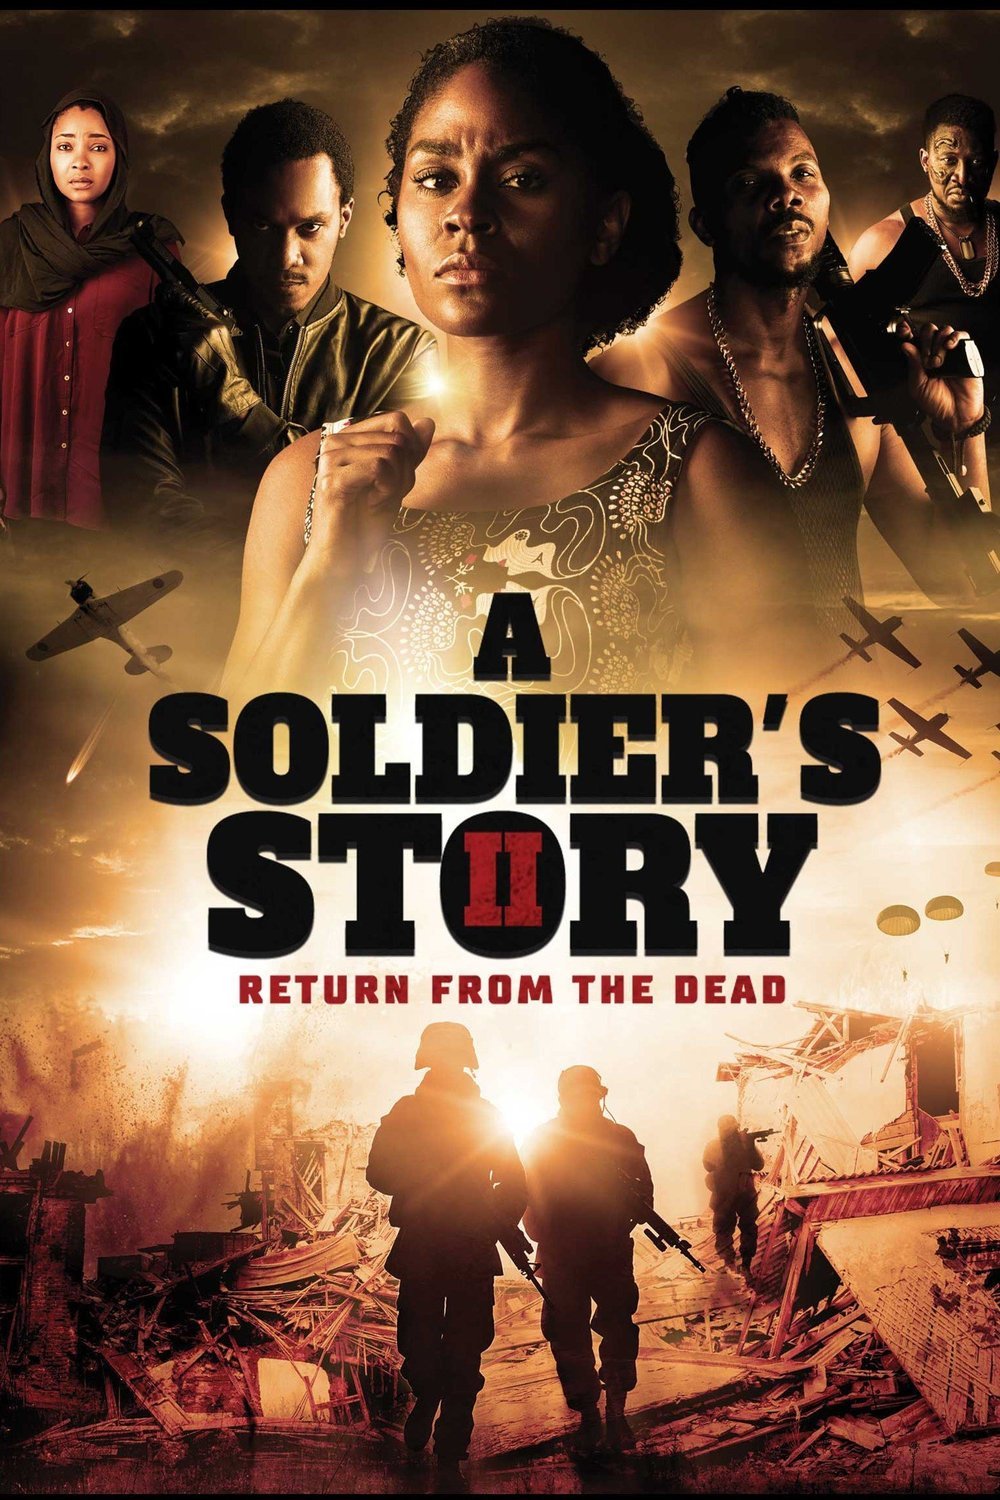 L'affiche du film A Soldier's Story 2: Return from the Dead